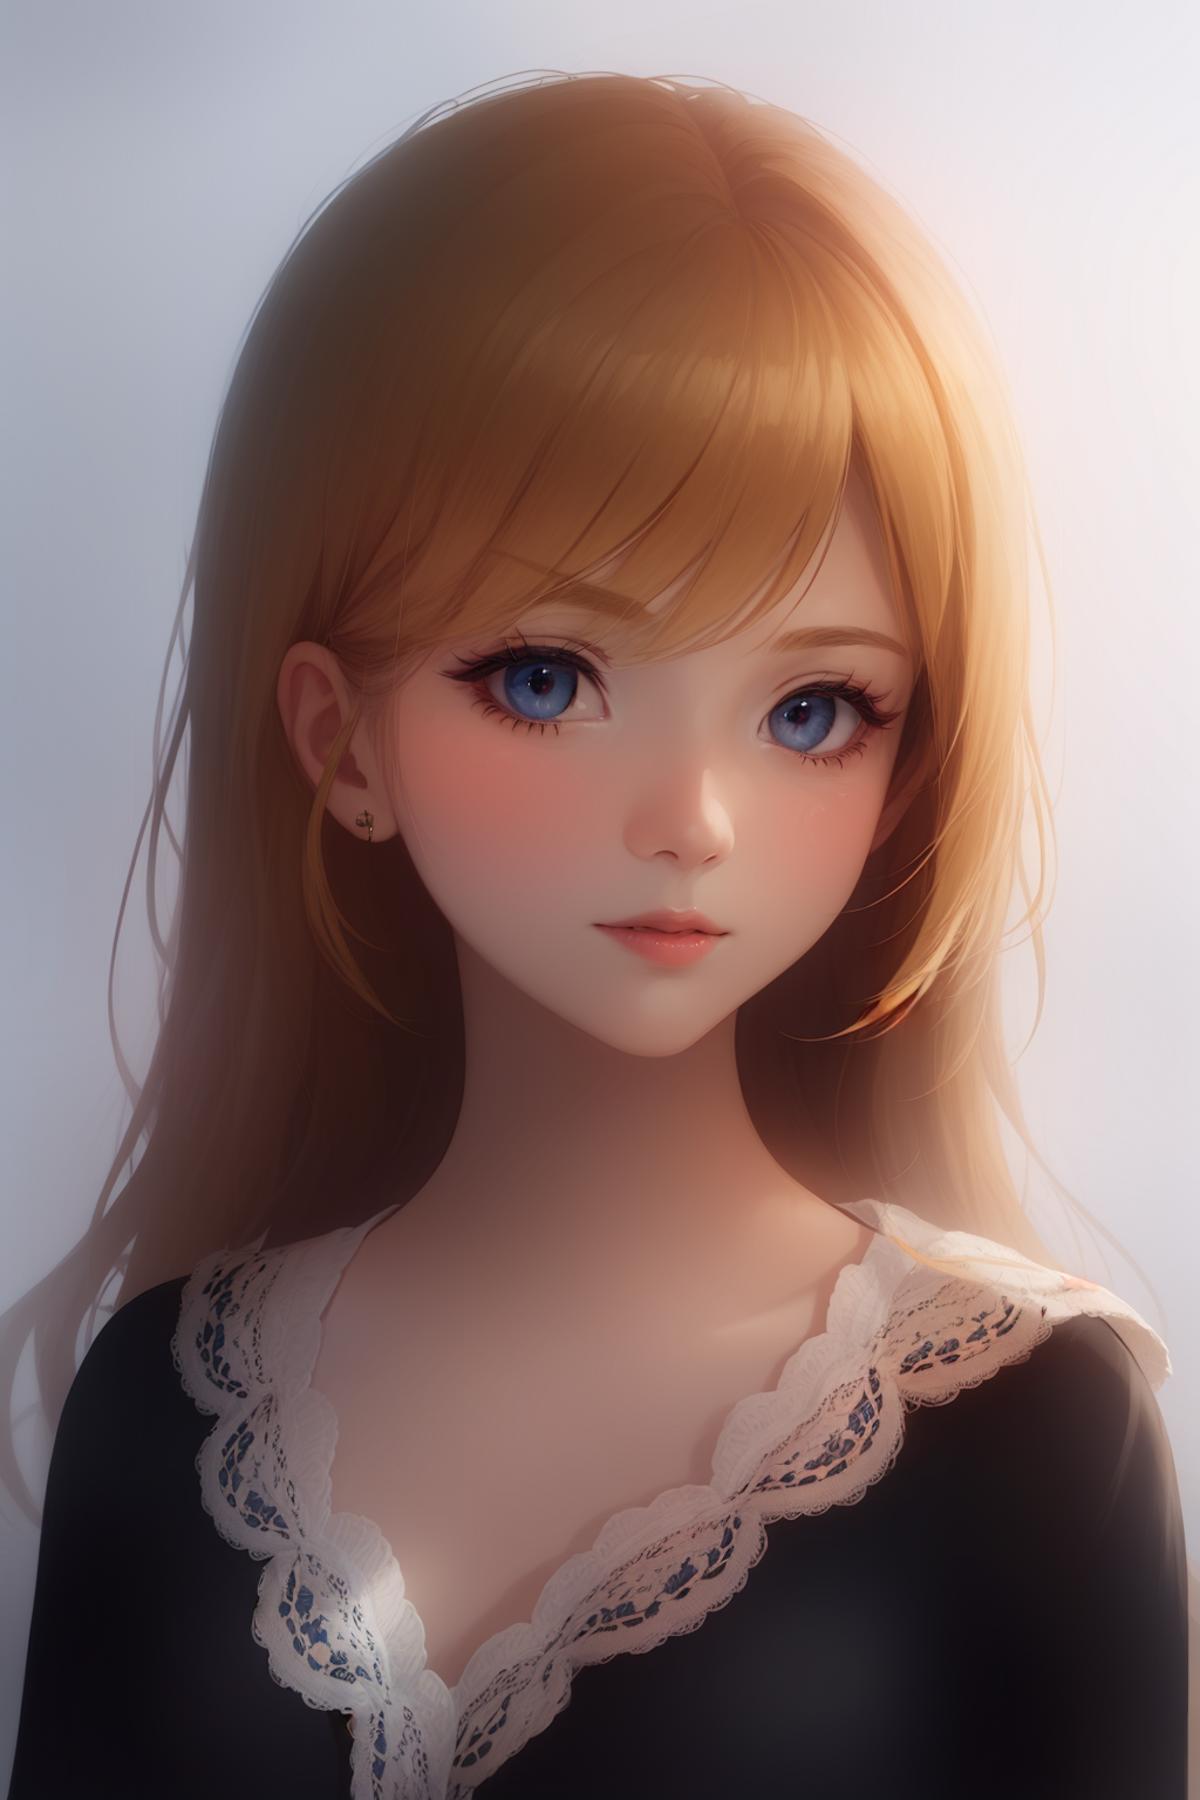 AI model image by As_7033